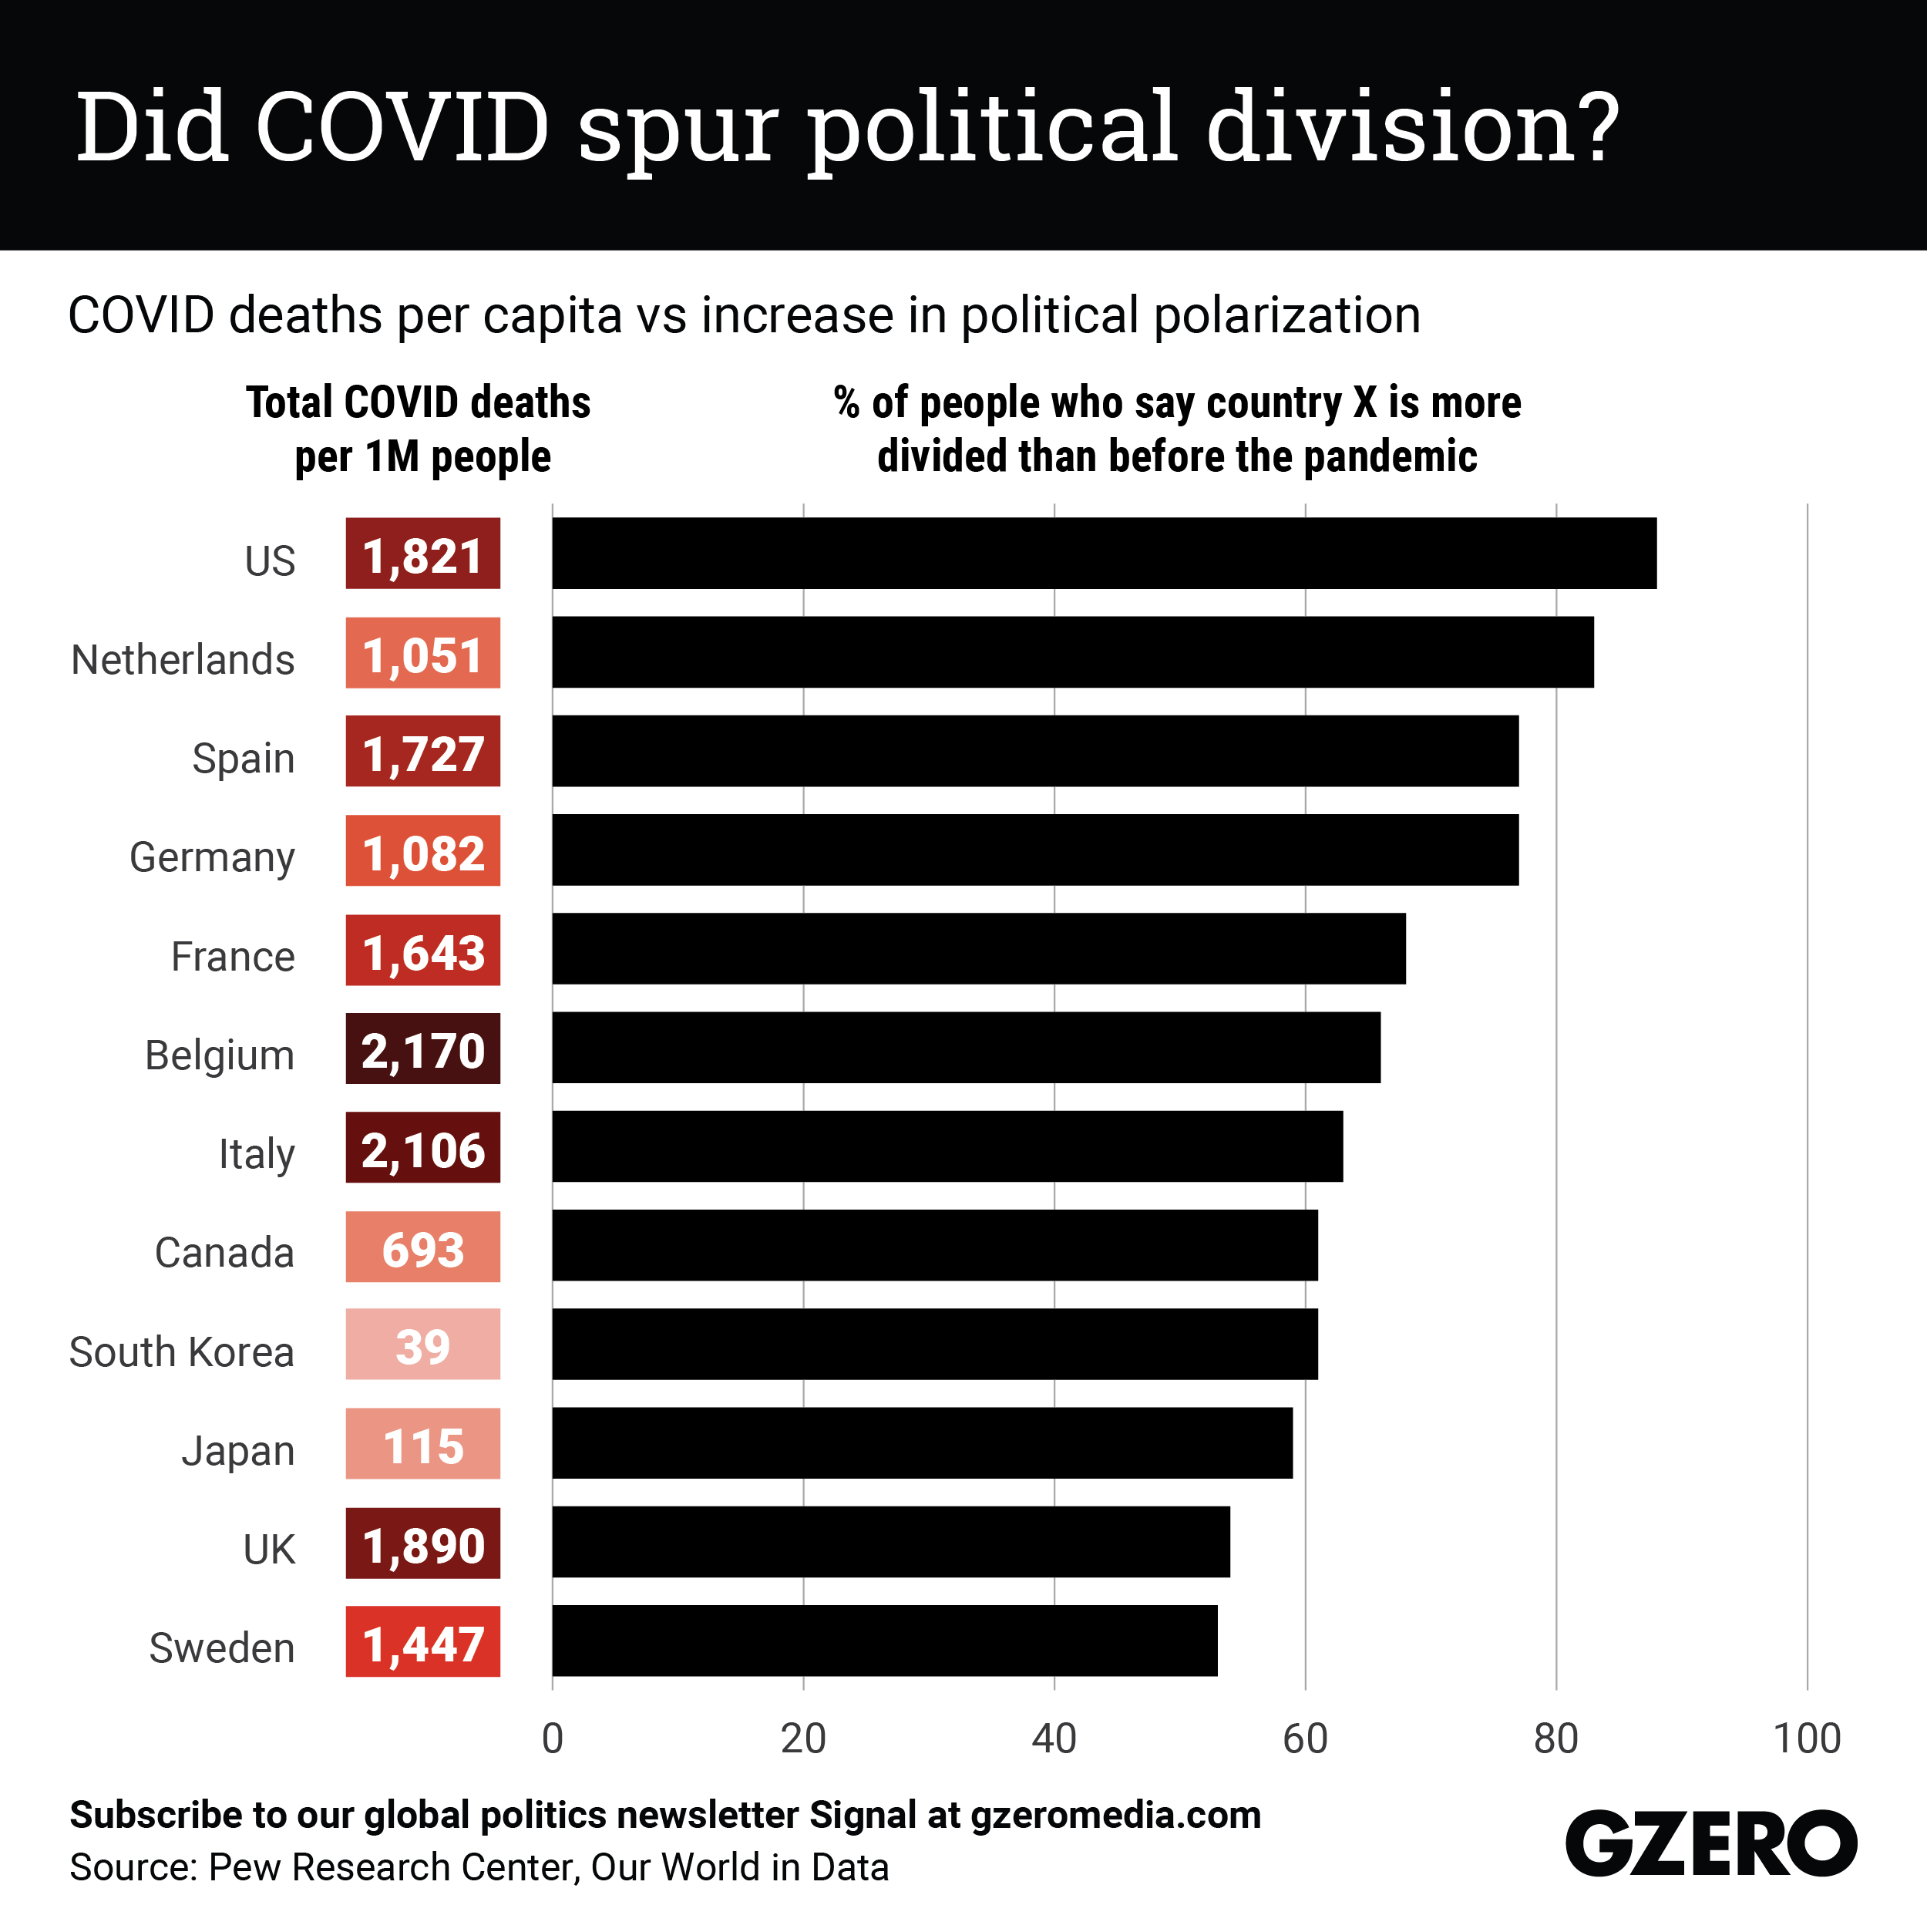 The Graphic Truth: Did COVID spur political division?